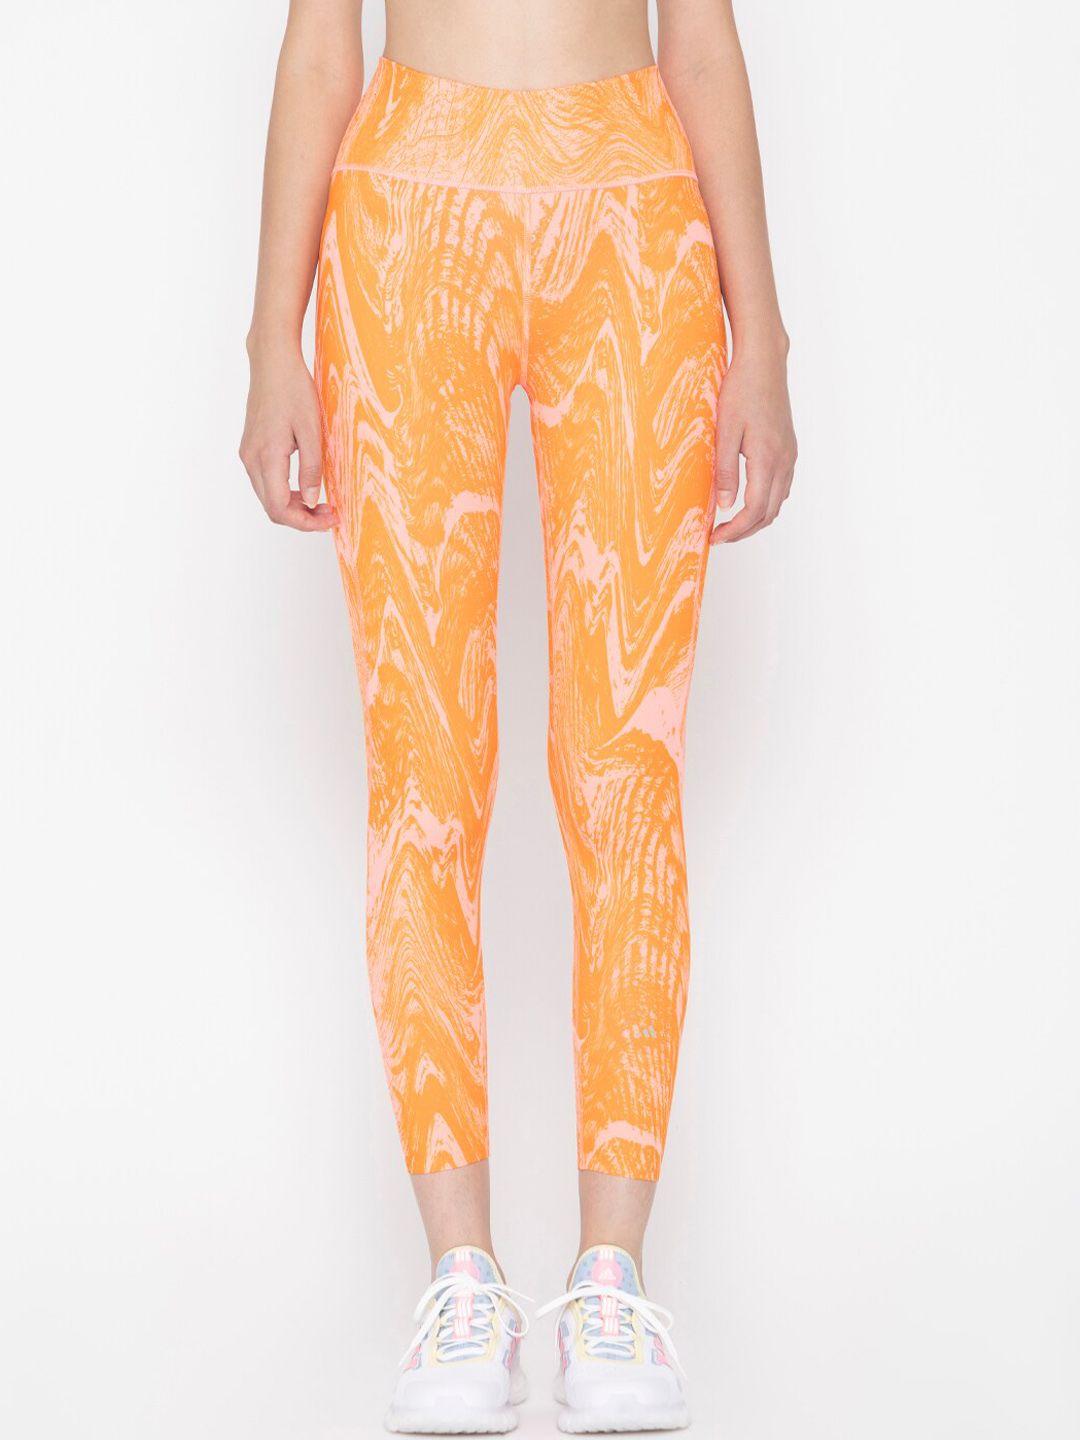 adidas asmc tpr ot 7/8 women abstract printed ankle length tights